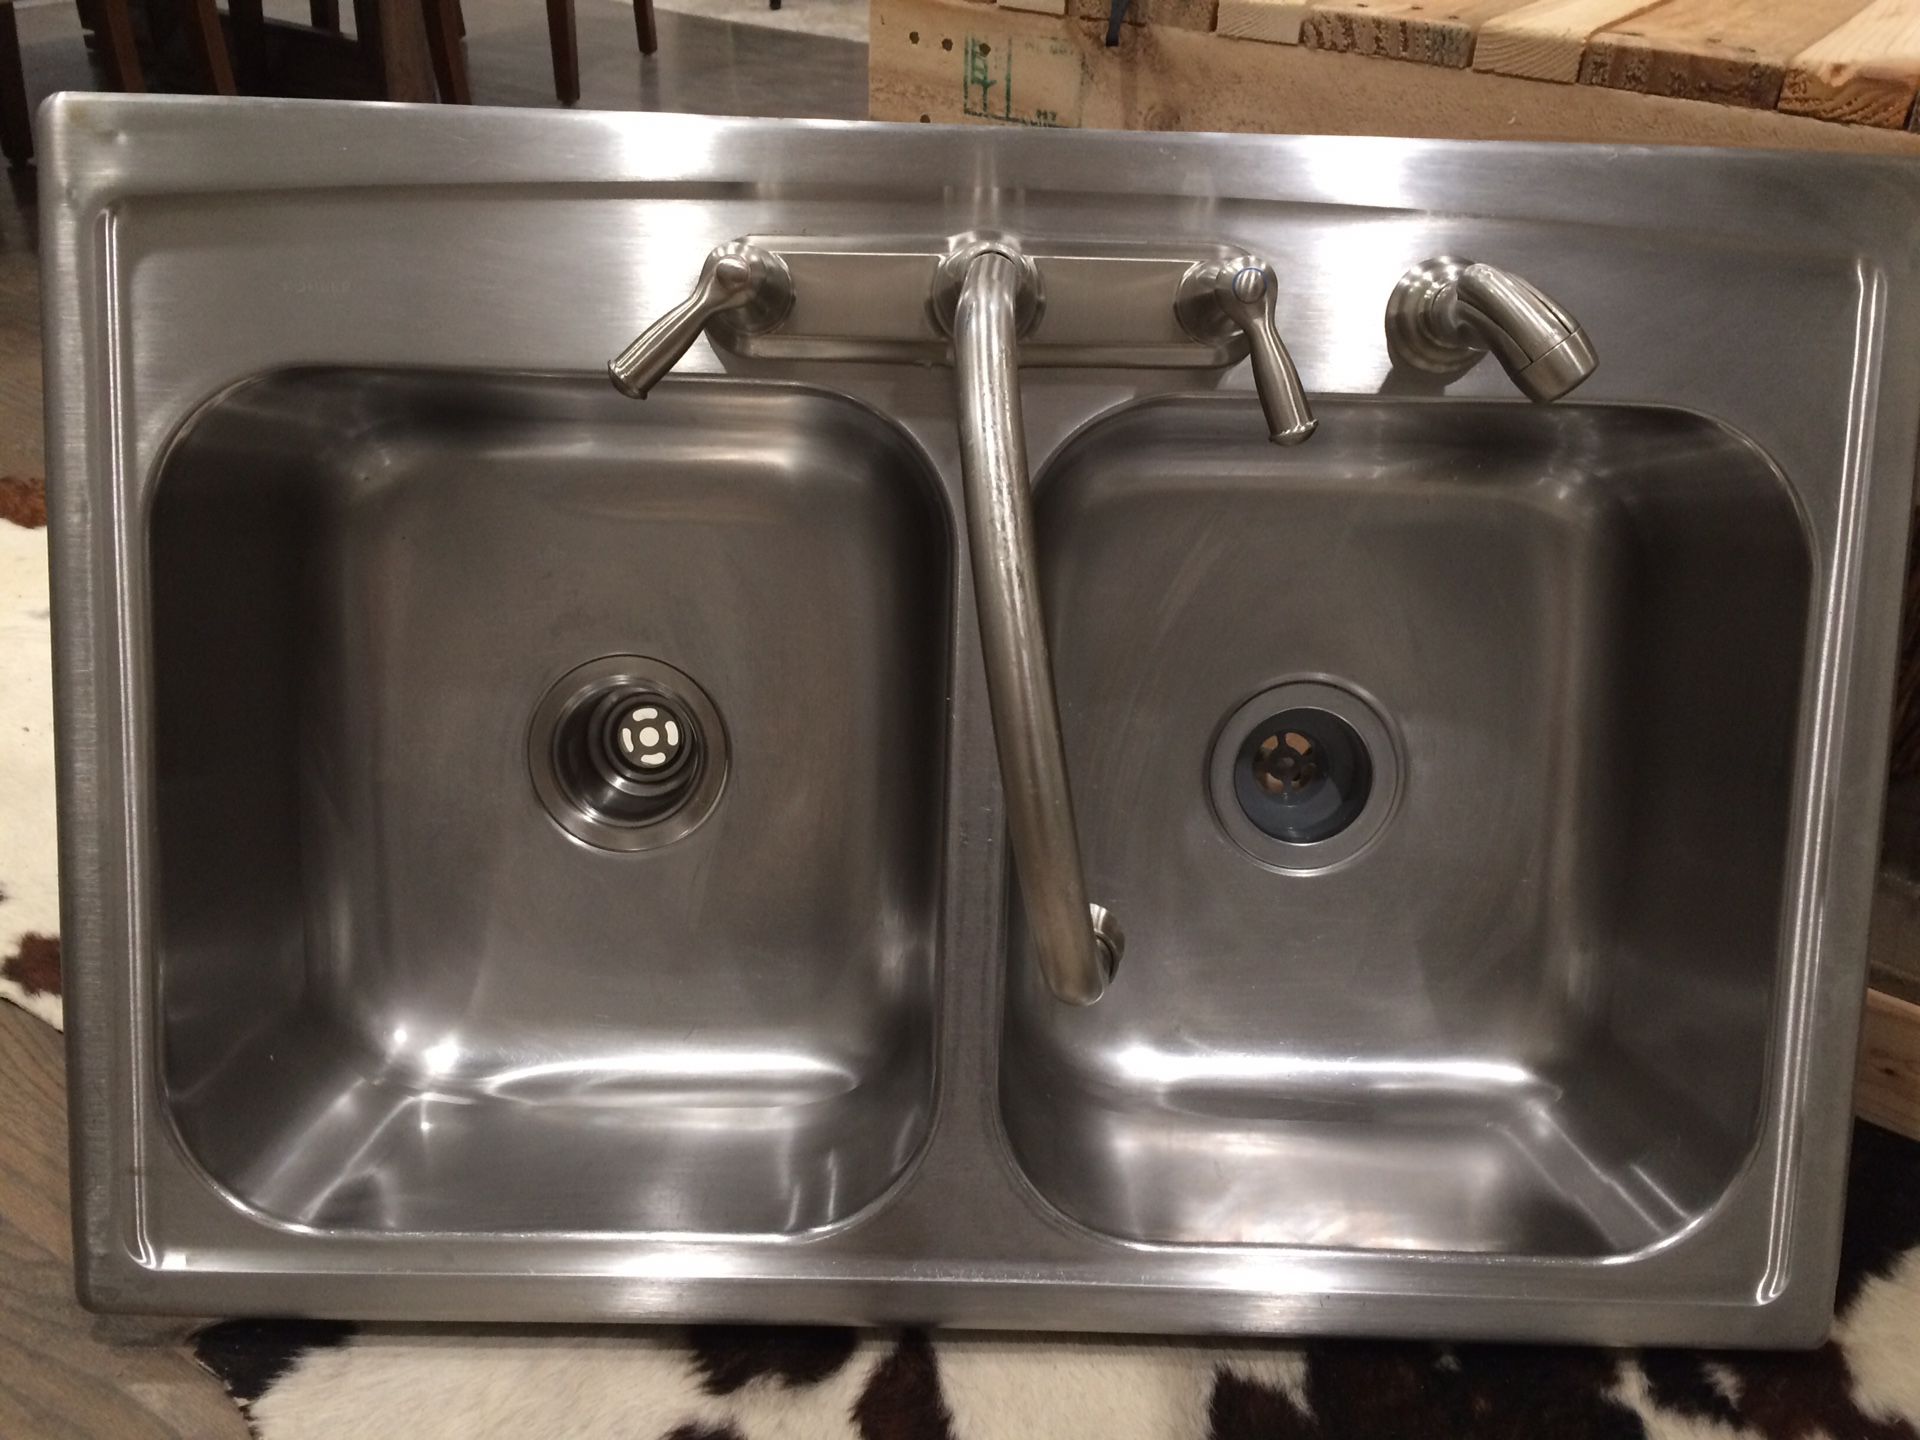 STAINLESS STEAL KITCHEN SINK WITH FAUCET (SINK B)